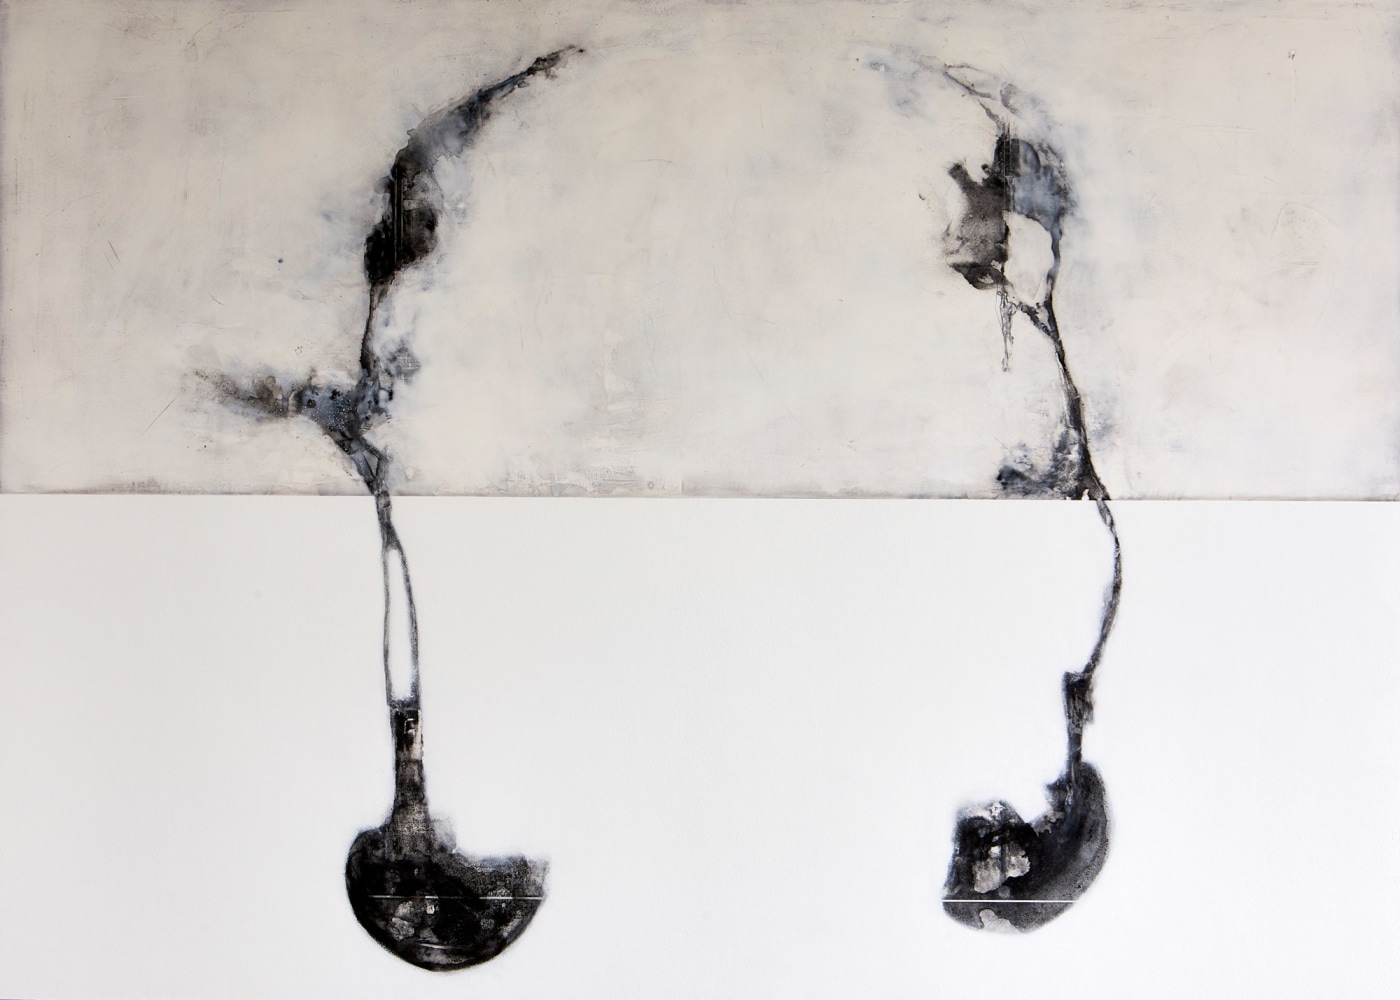 Andrew Wapinski
Untitled XV, 2022
Anthracite Coal, Pigmented Ice, Acrylic, &amp;amp; Ink on Linen Mounted Panel
50h x 70w x 2.50d in
SOLD